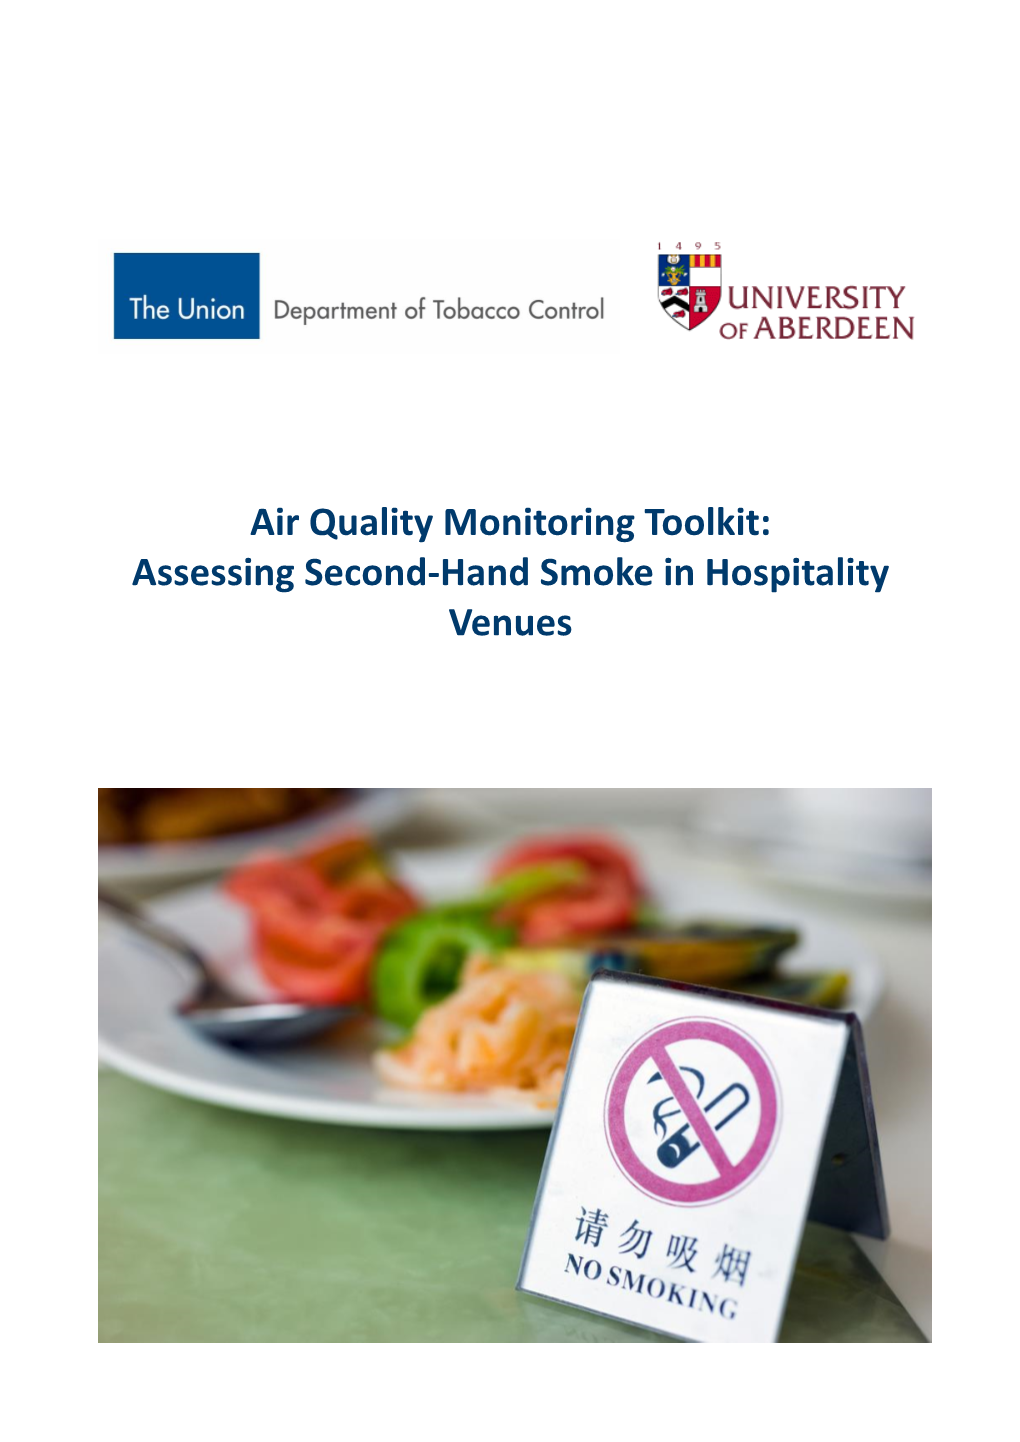 Air Quality Monitoring Toolkit: Assessing Second-Hand Smoke in Hospitality Venues